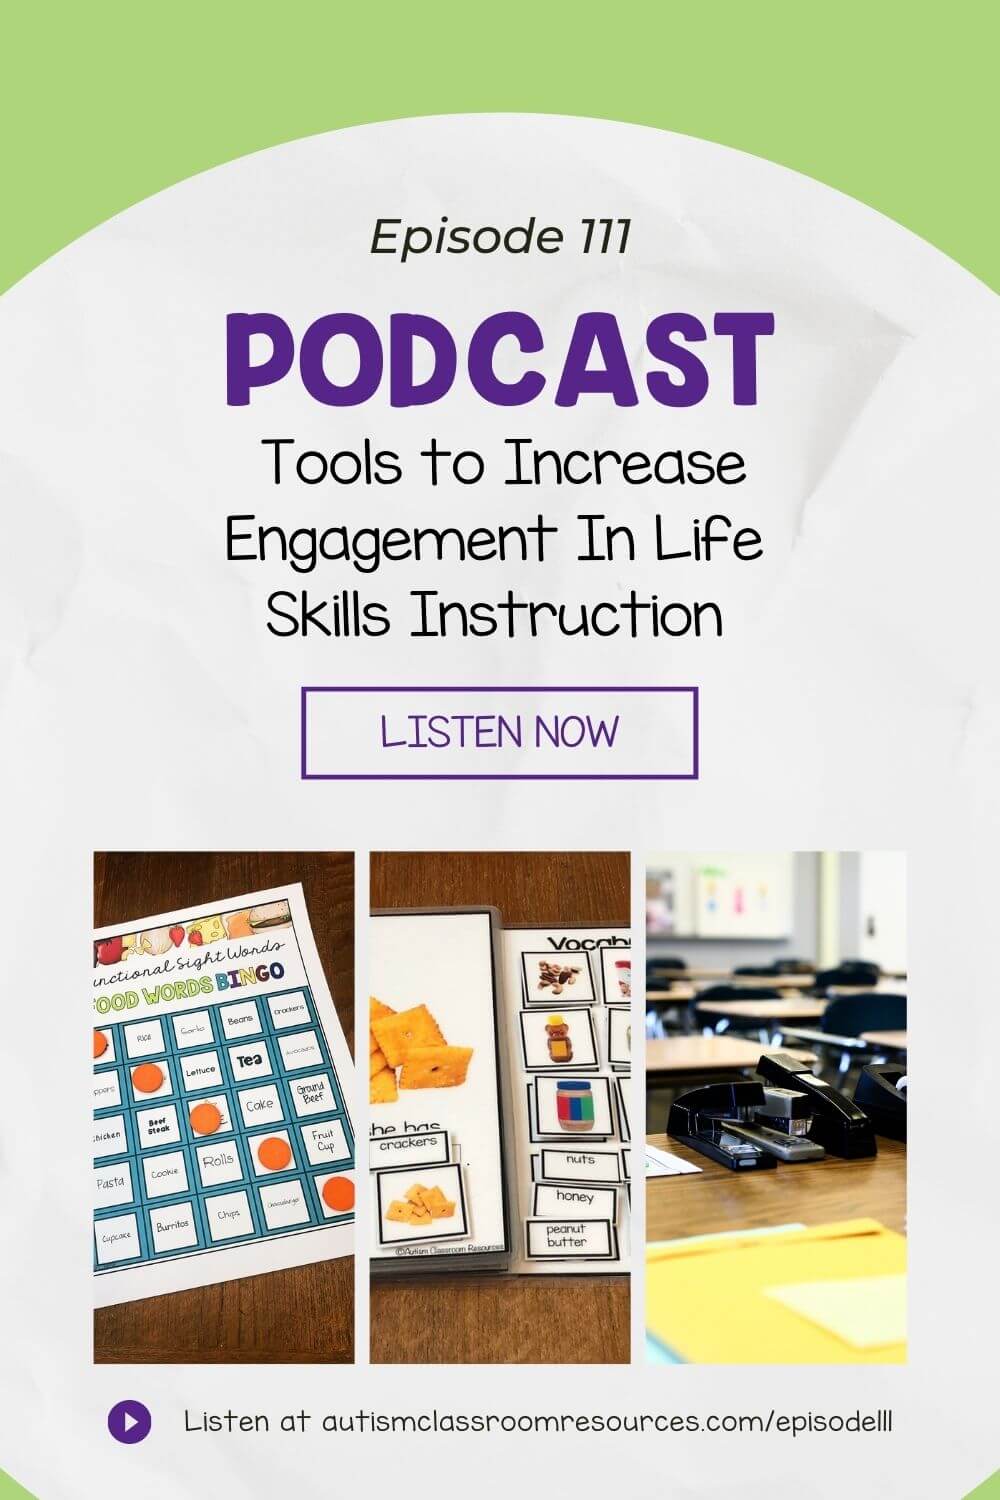 Tools to Increase Engagement In Life Skills Instruction